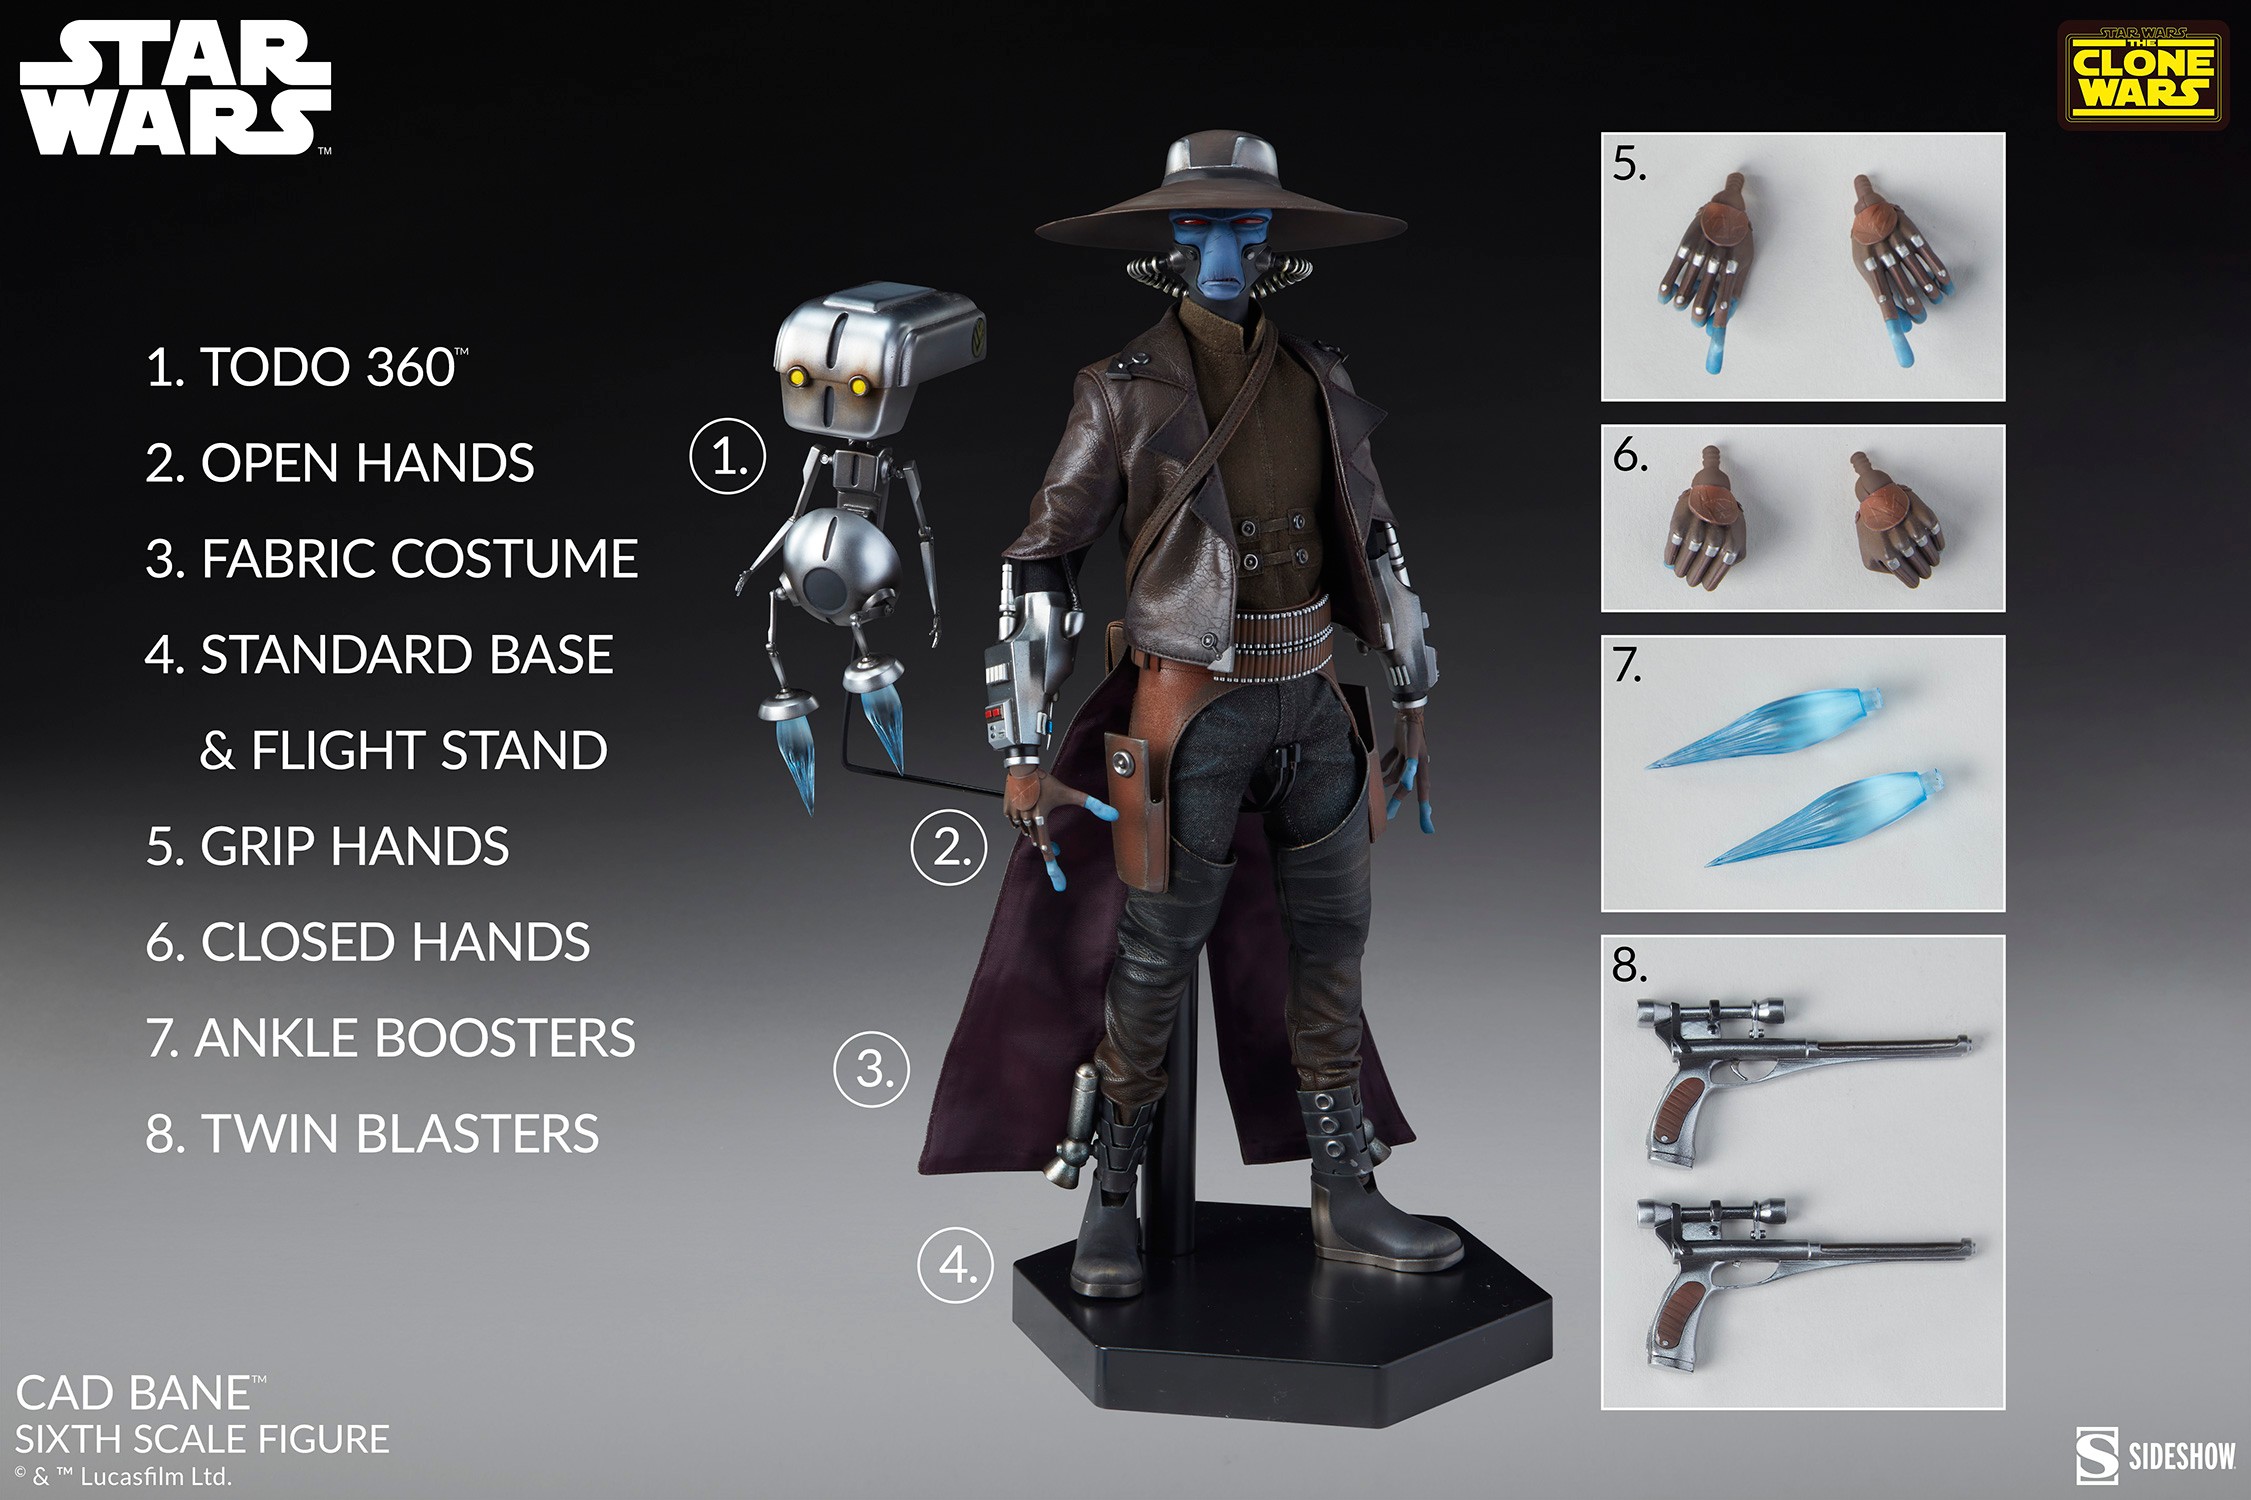 SWTCW Cad Bane Sixth Scale Figure 5